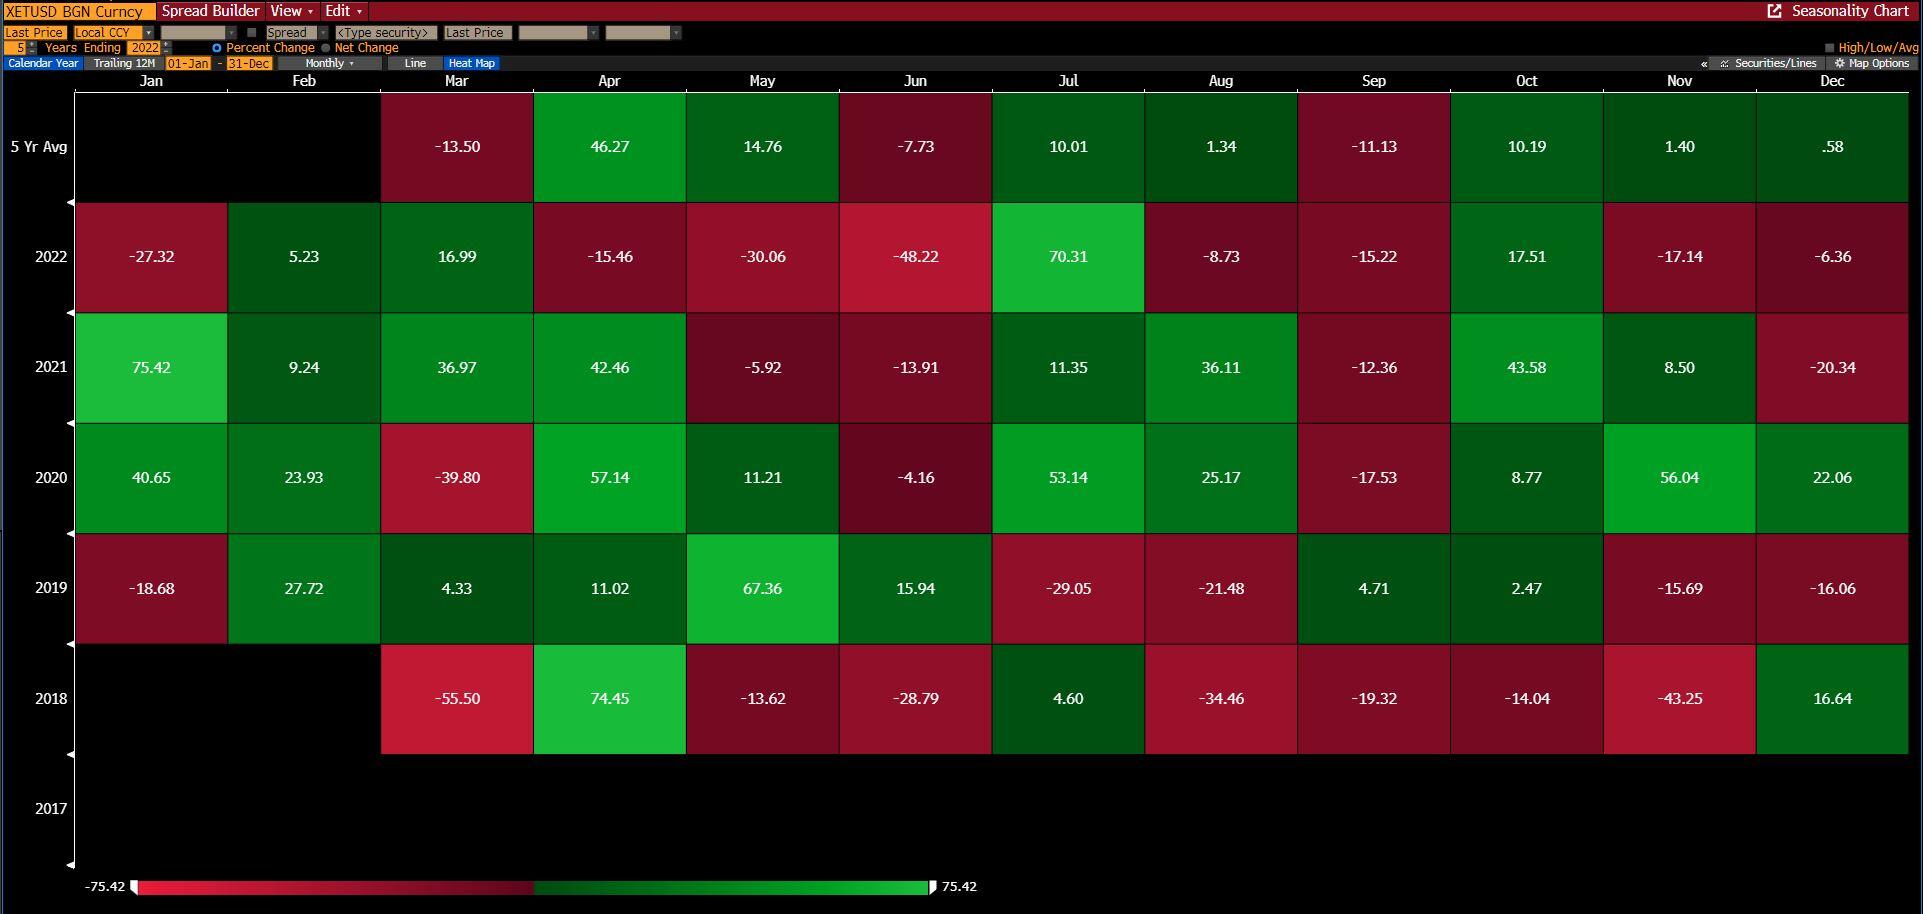 ETH/USD heat map monthly performance